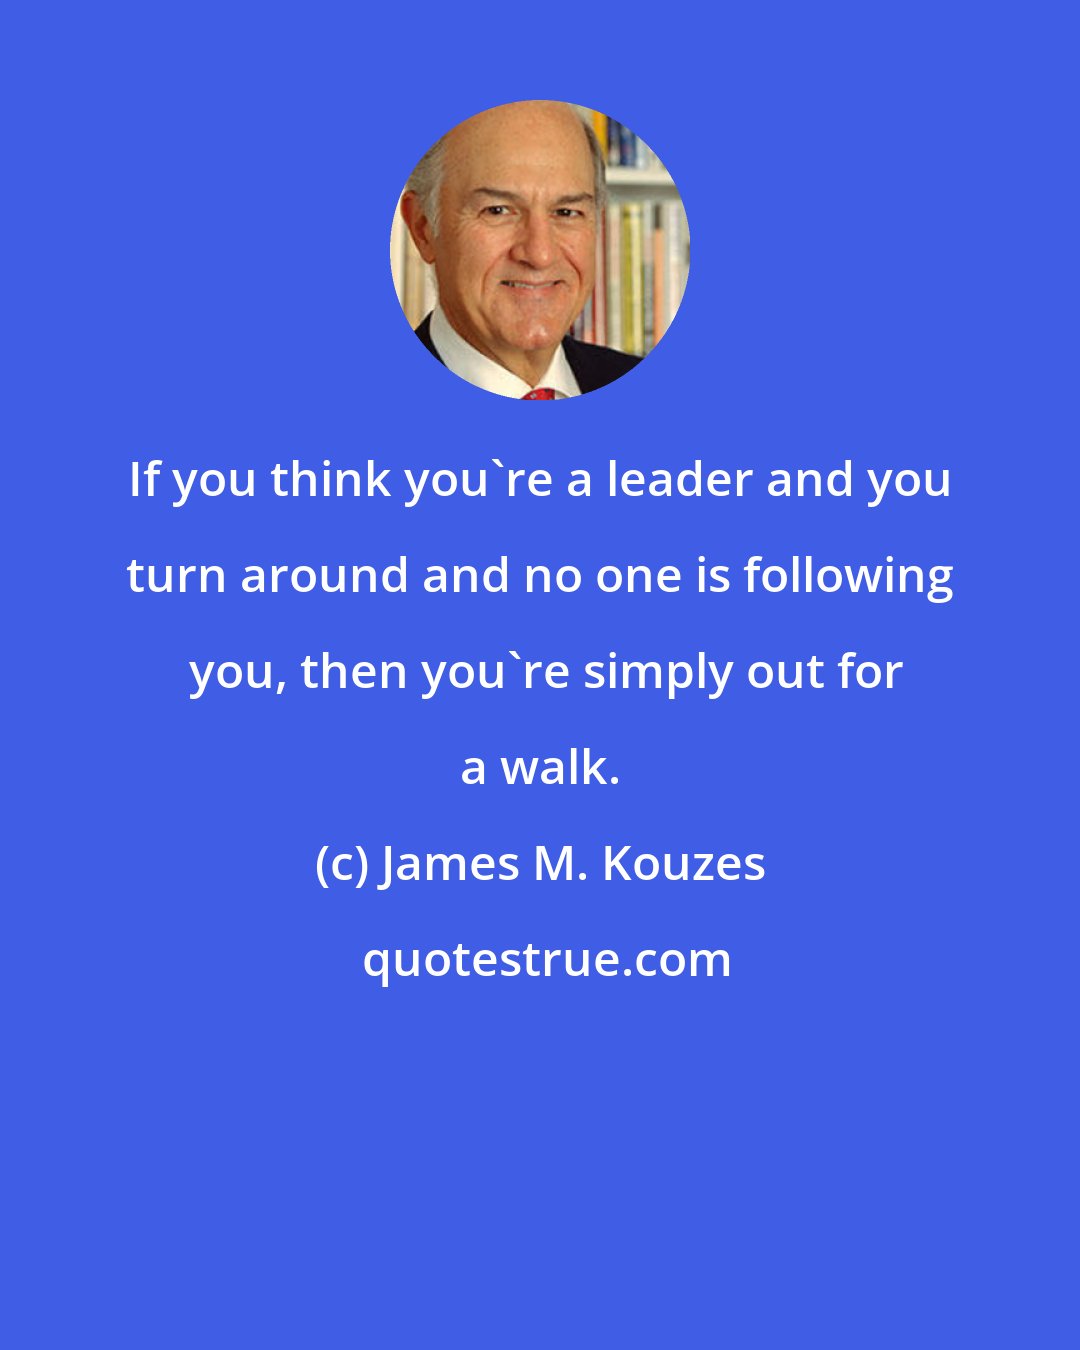 James M. Kouzes: If you think you're a leader and you turn around and no one is following  you, then you're simply out for a walk.